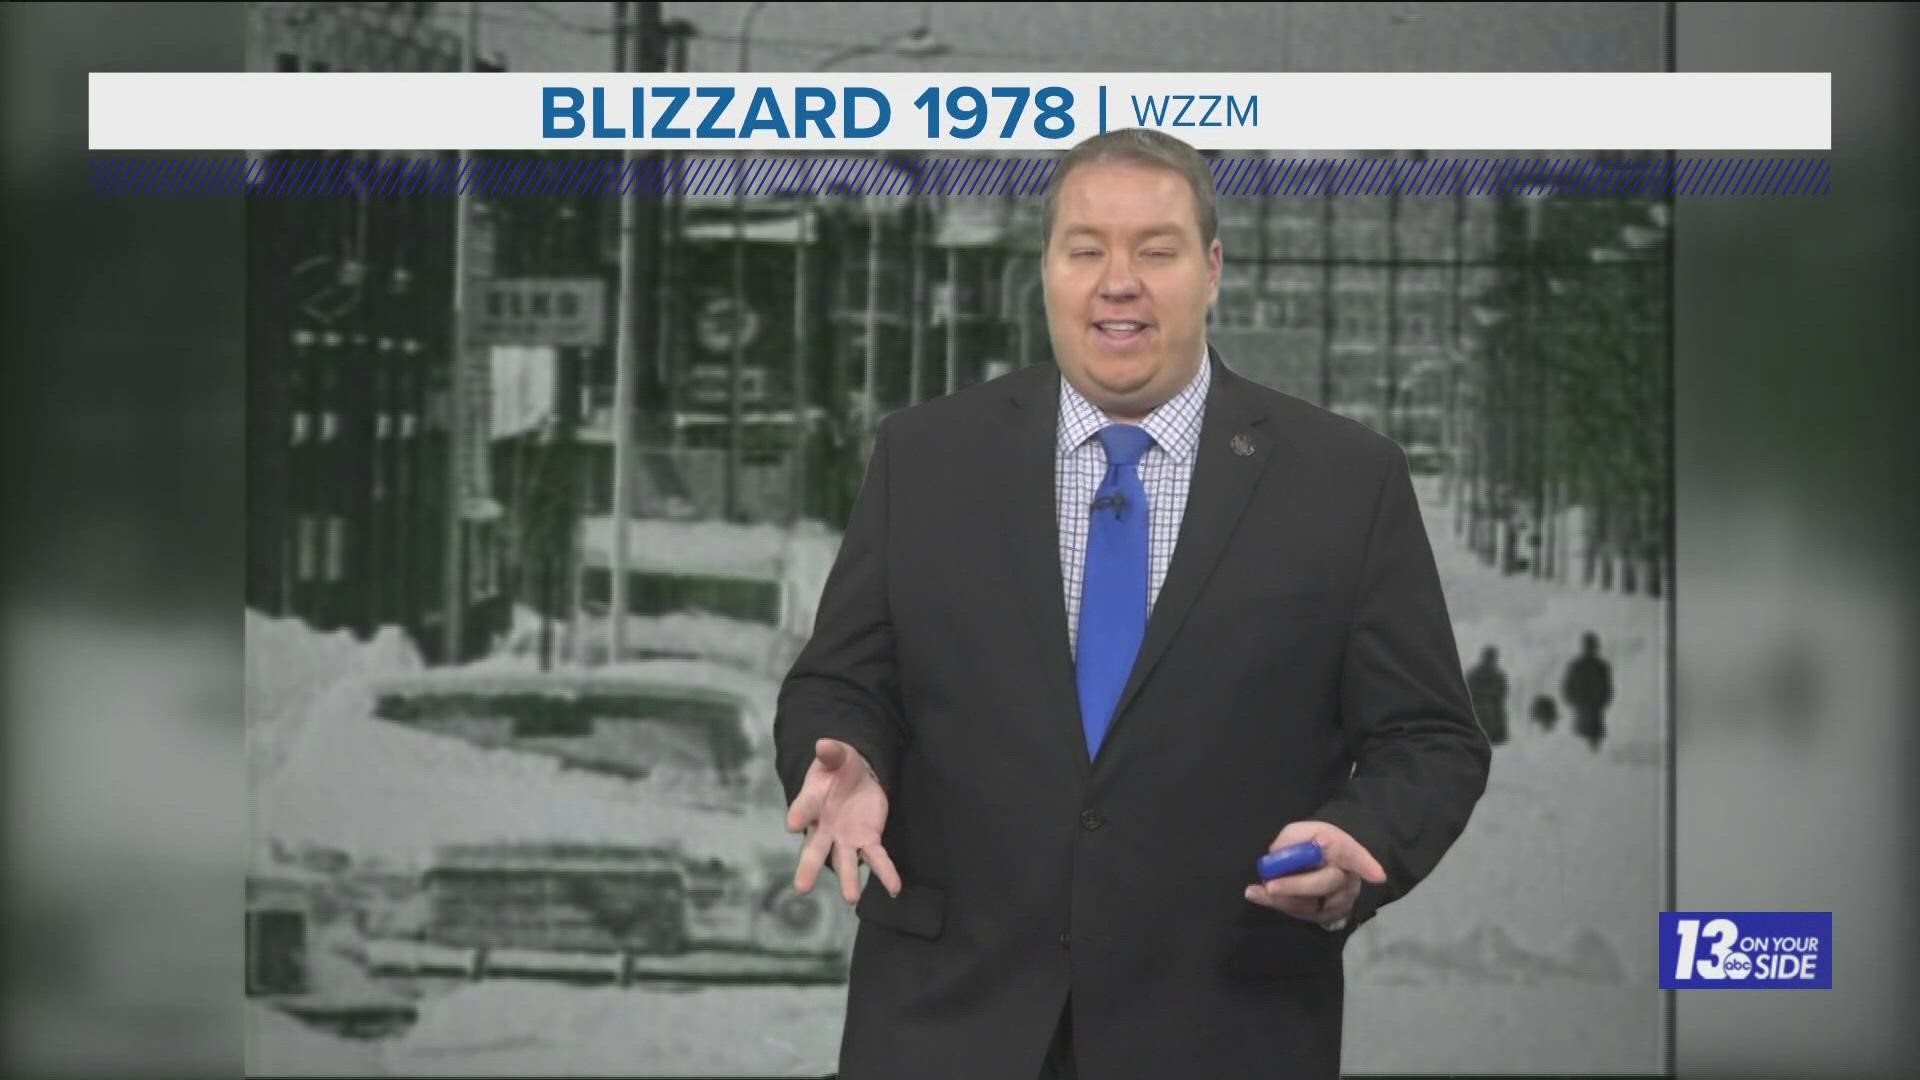 It's been 45 years since the Blizzard of 1978 hit West Michigan. Here's a look back with Meteorologist Michael Behrens.